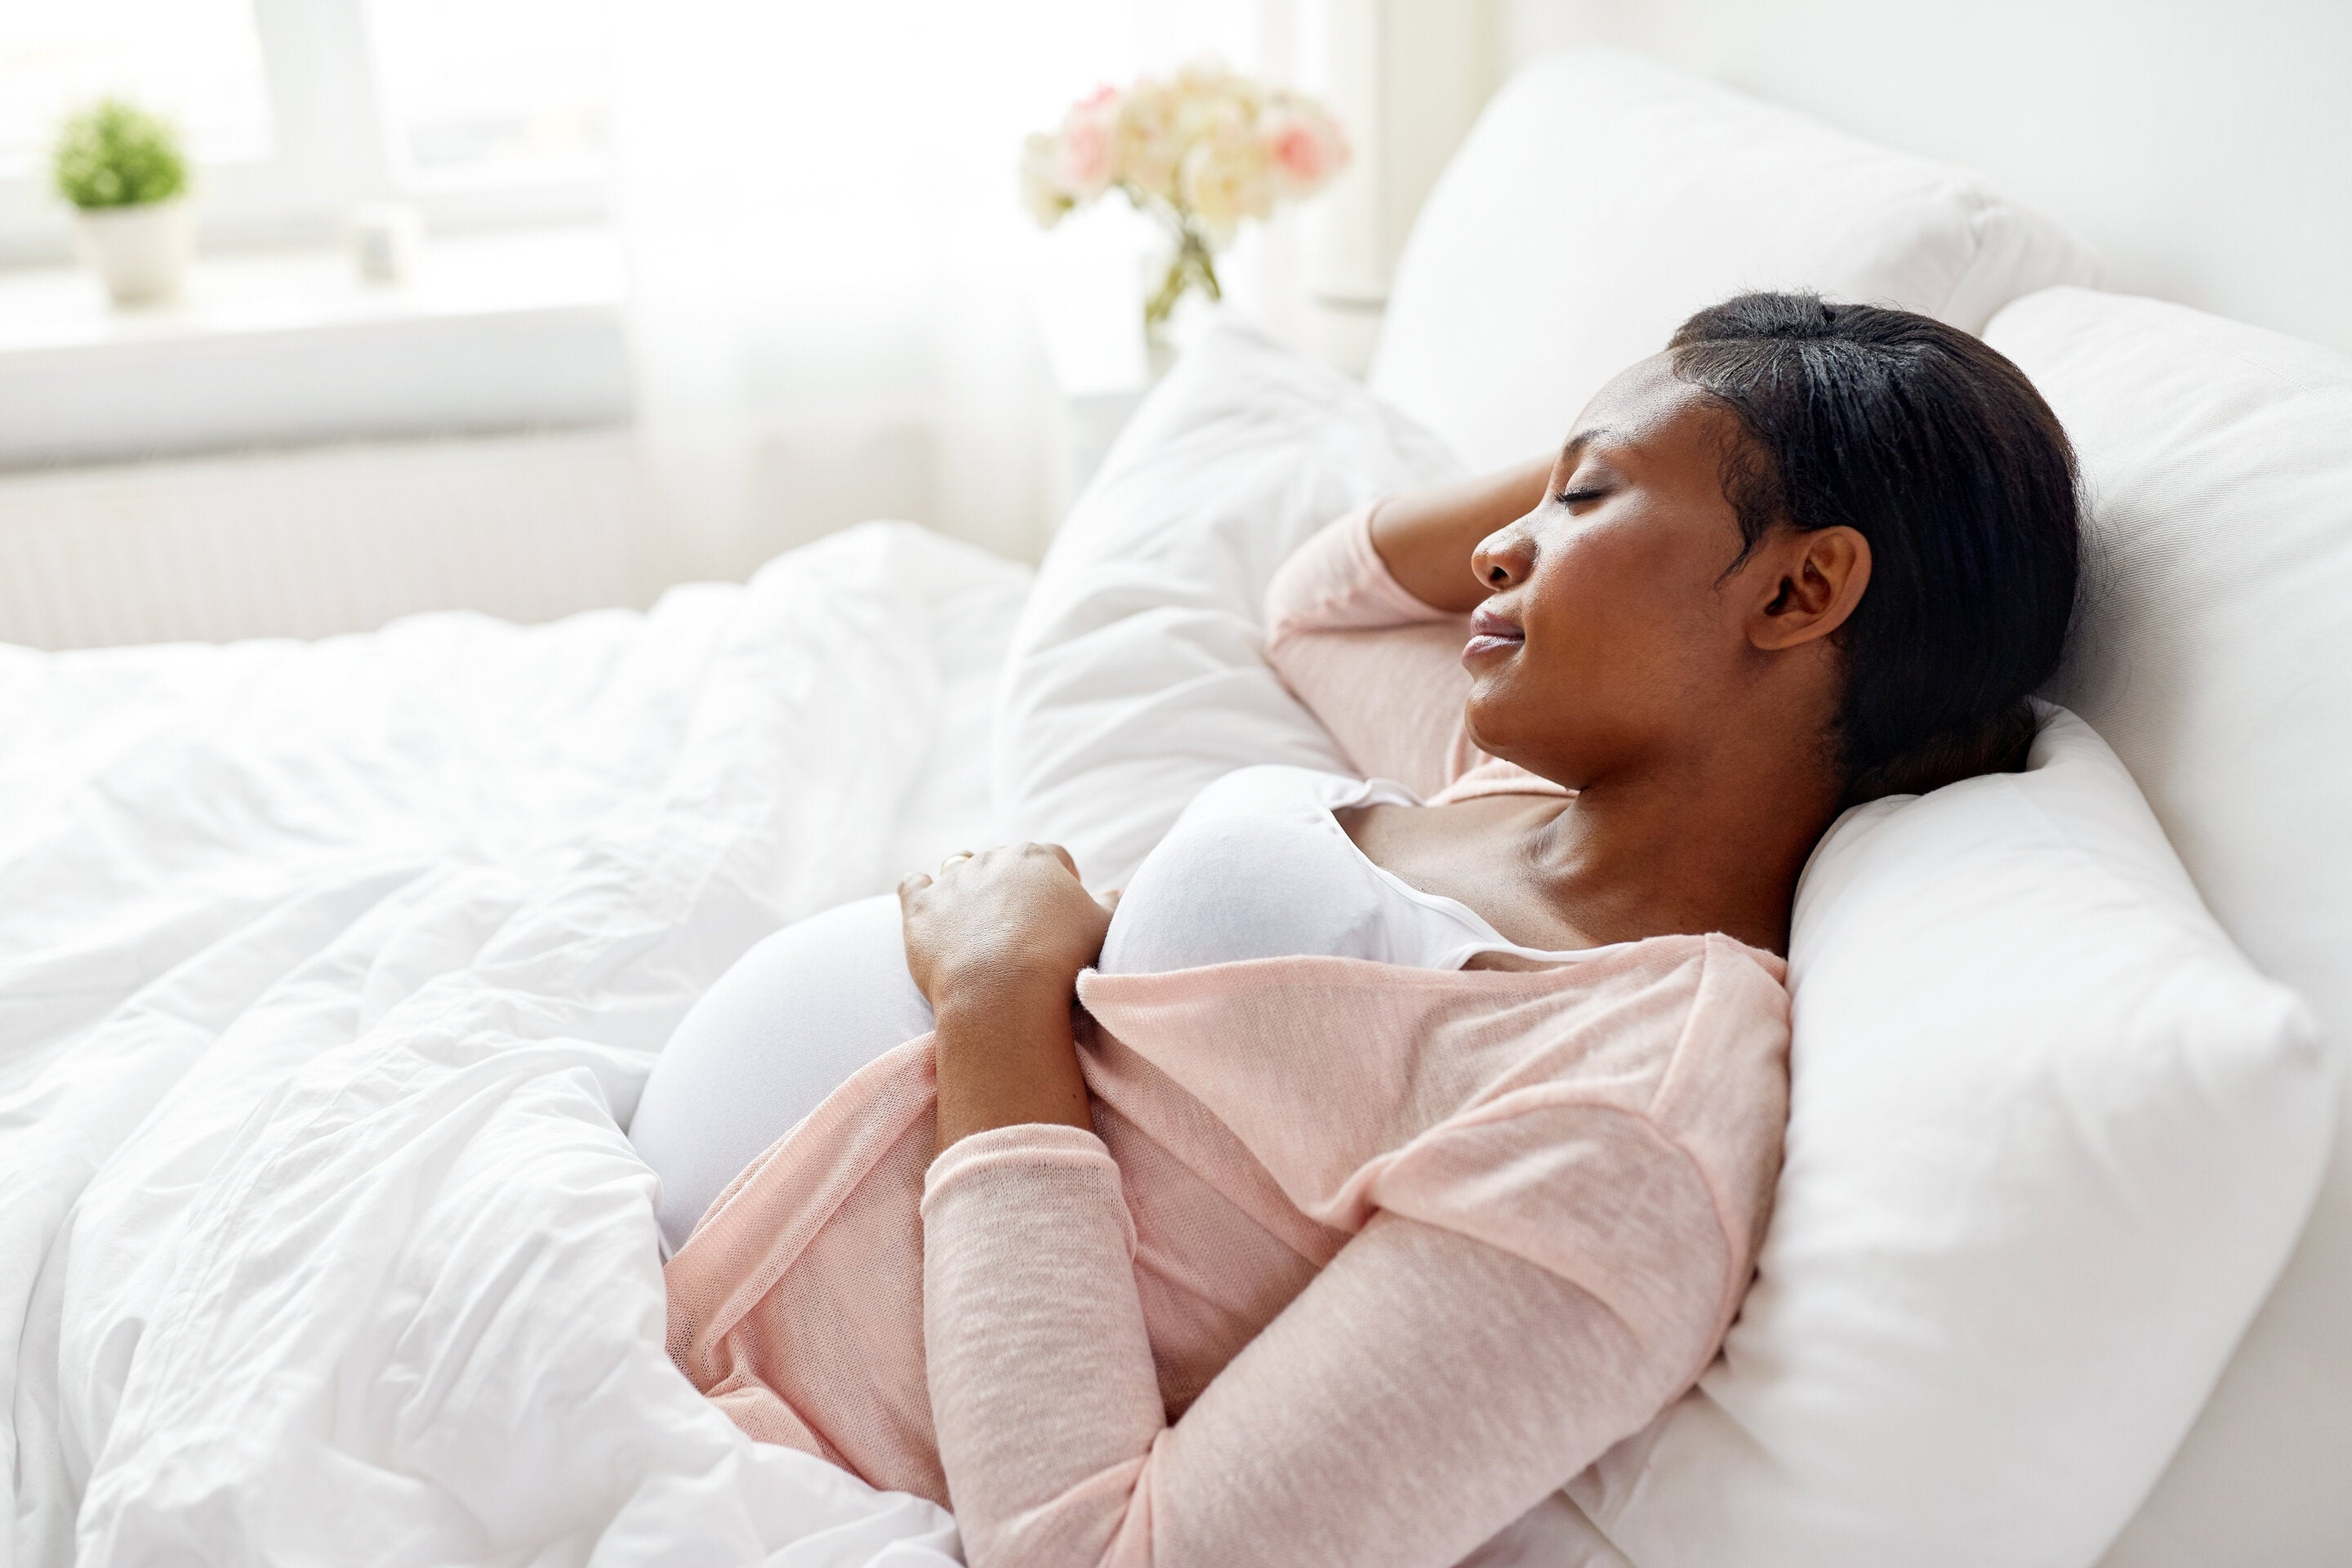 How to sleep better in pregnancy: 10 tips, Pregnancy articles & support